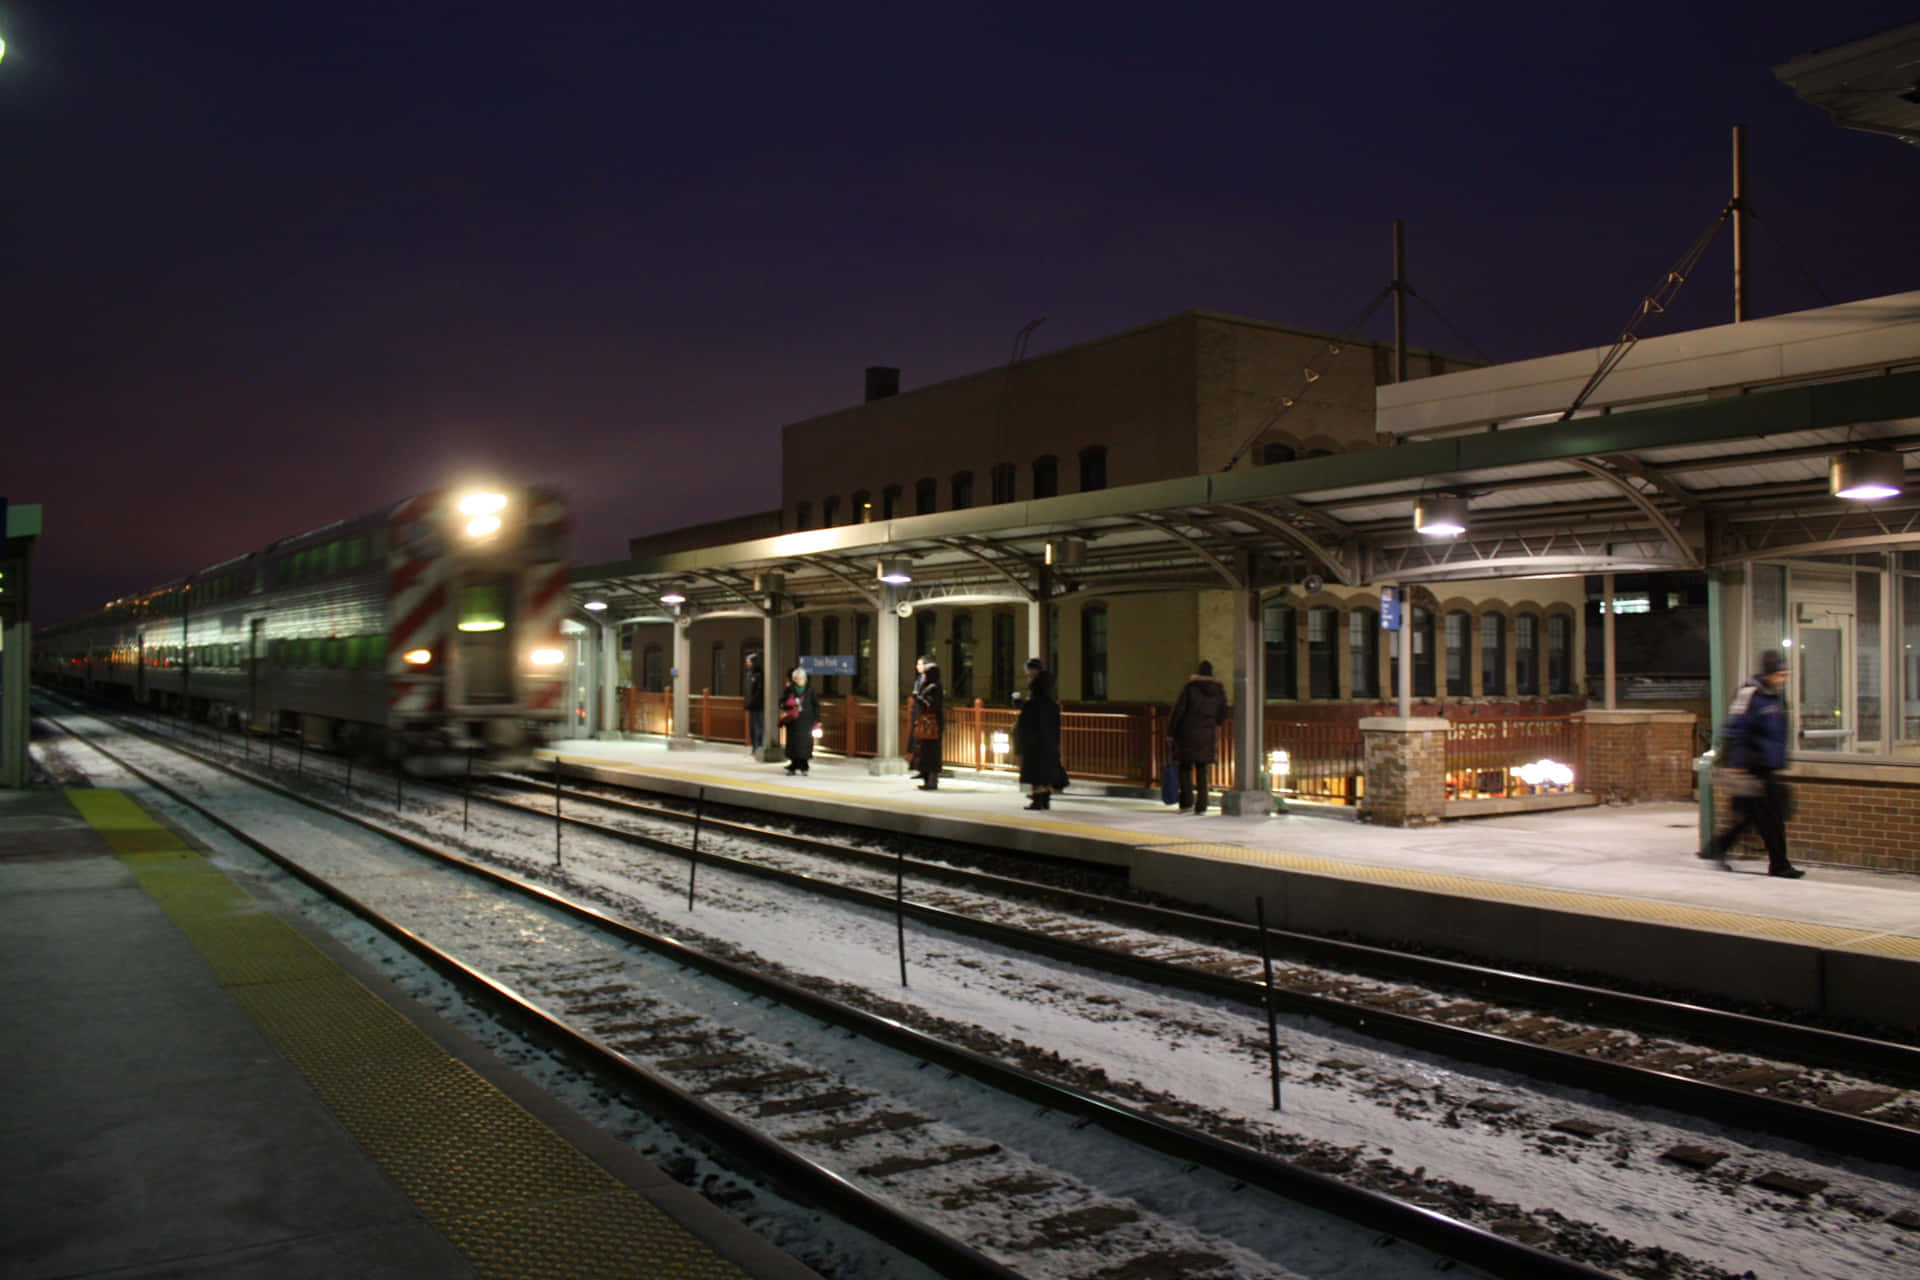 A View of a Typical Train Station